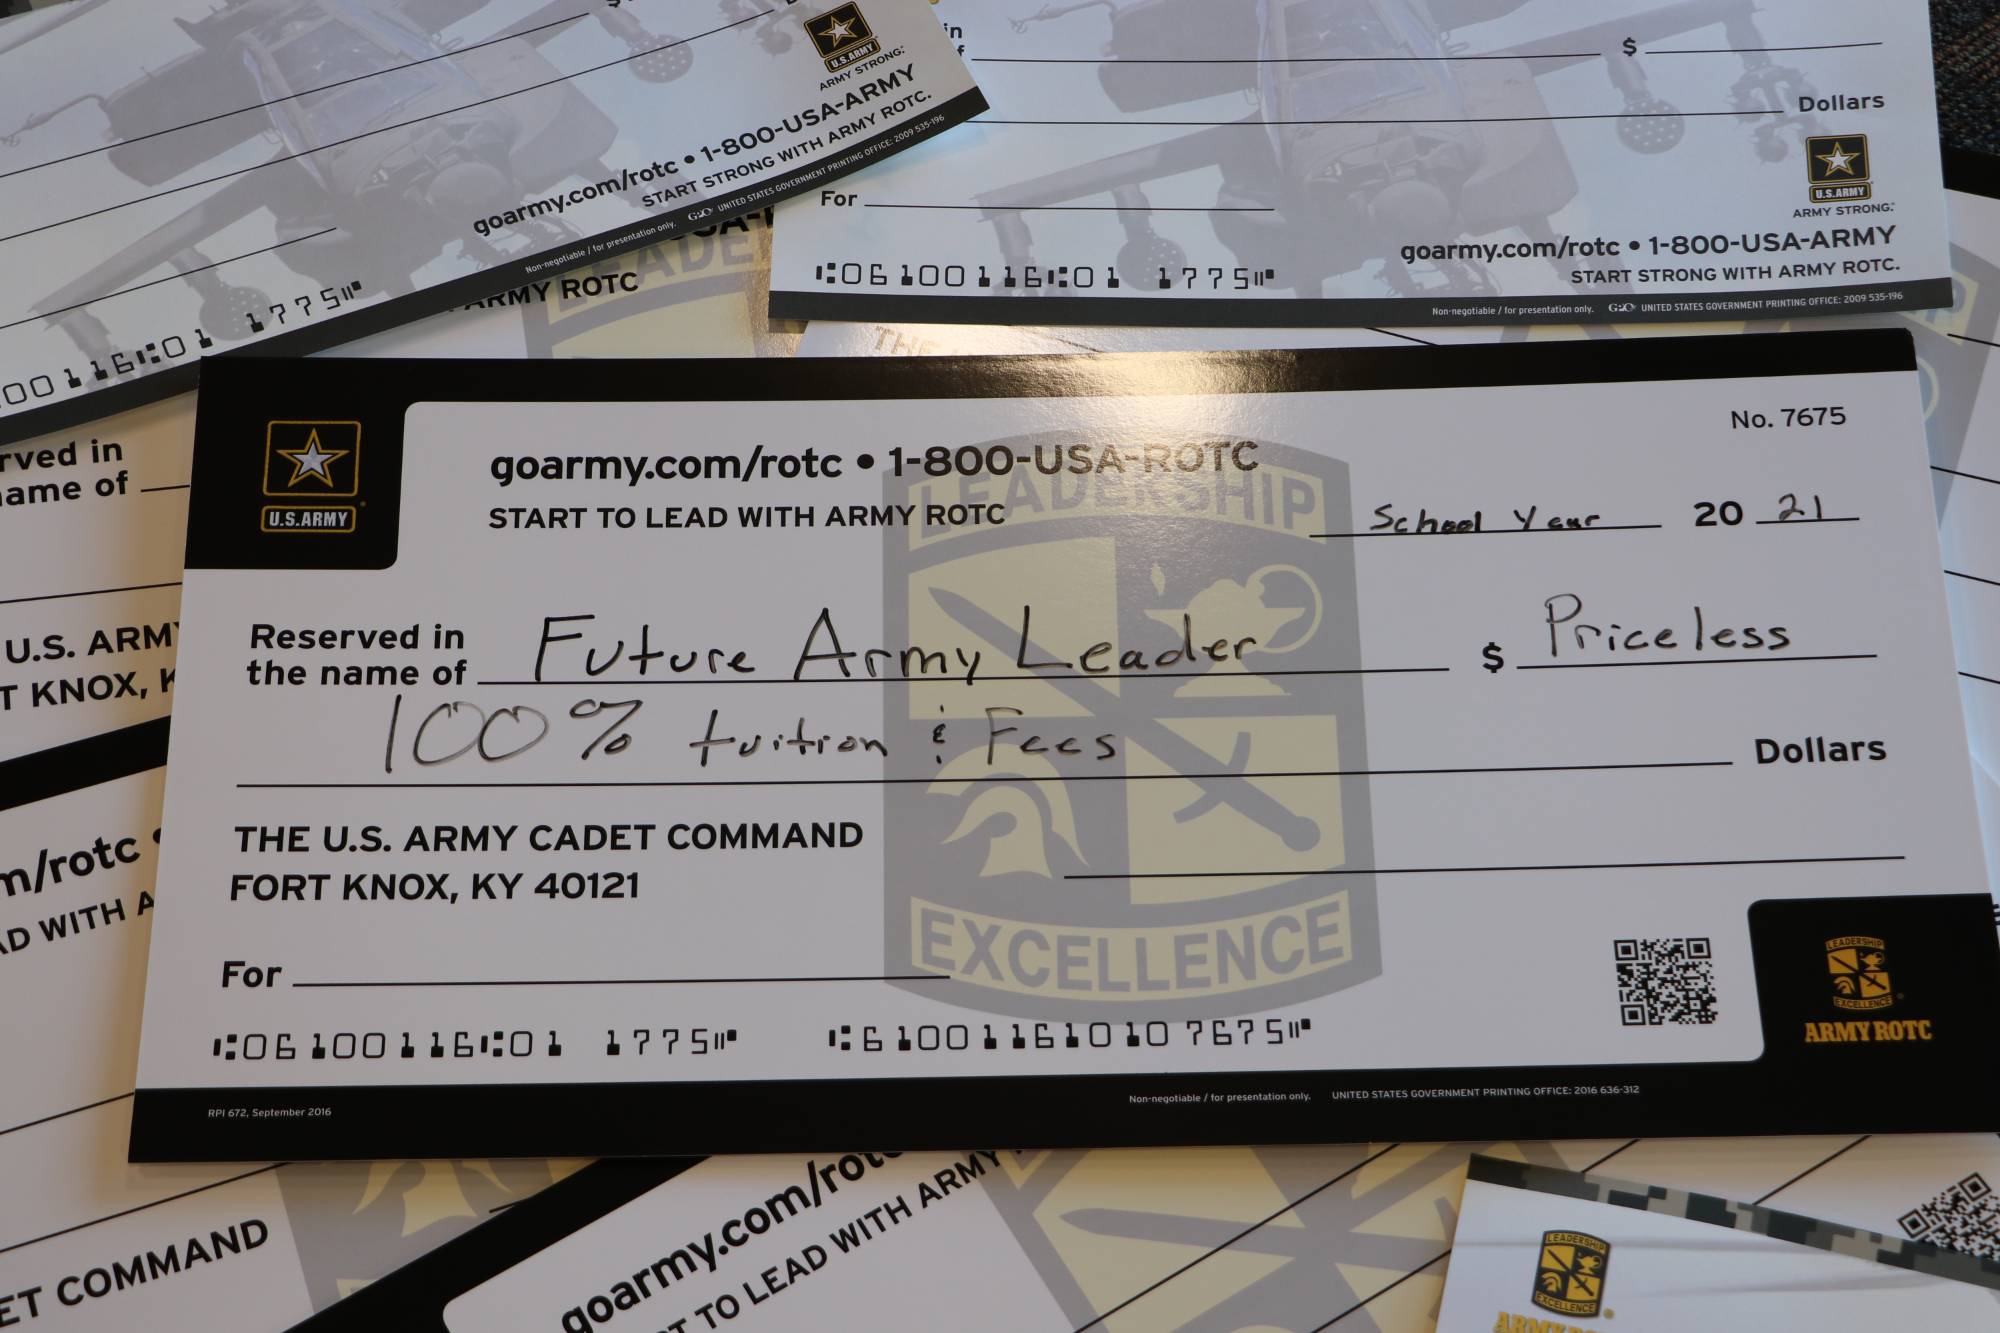 Large pile of ROTC scholarship checks made out to future leaders to cover 100% of college tuition